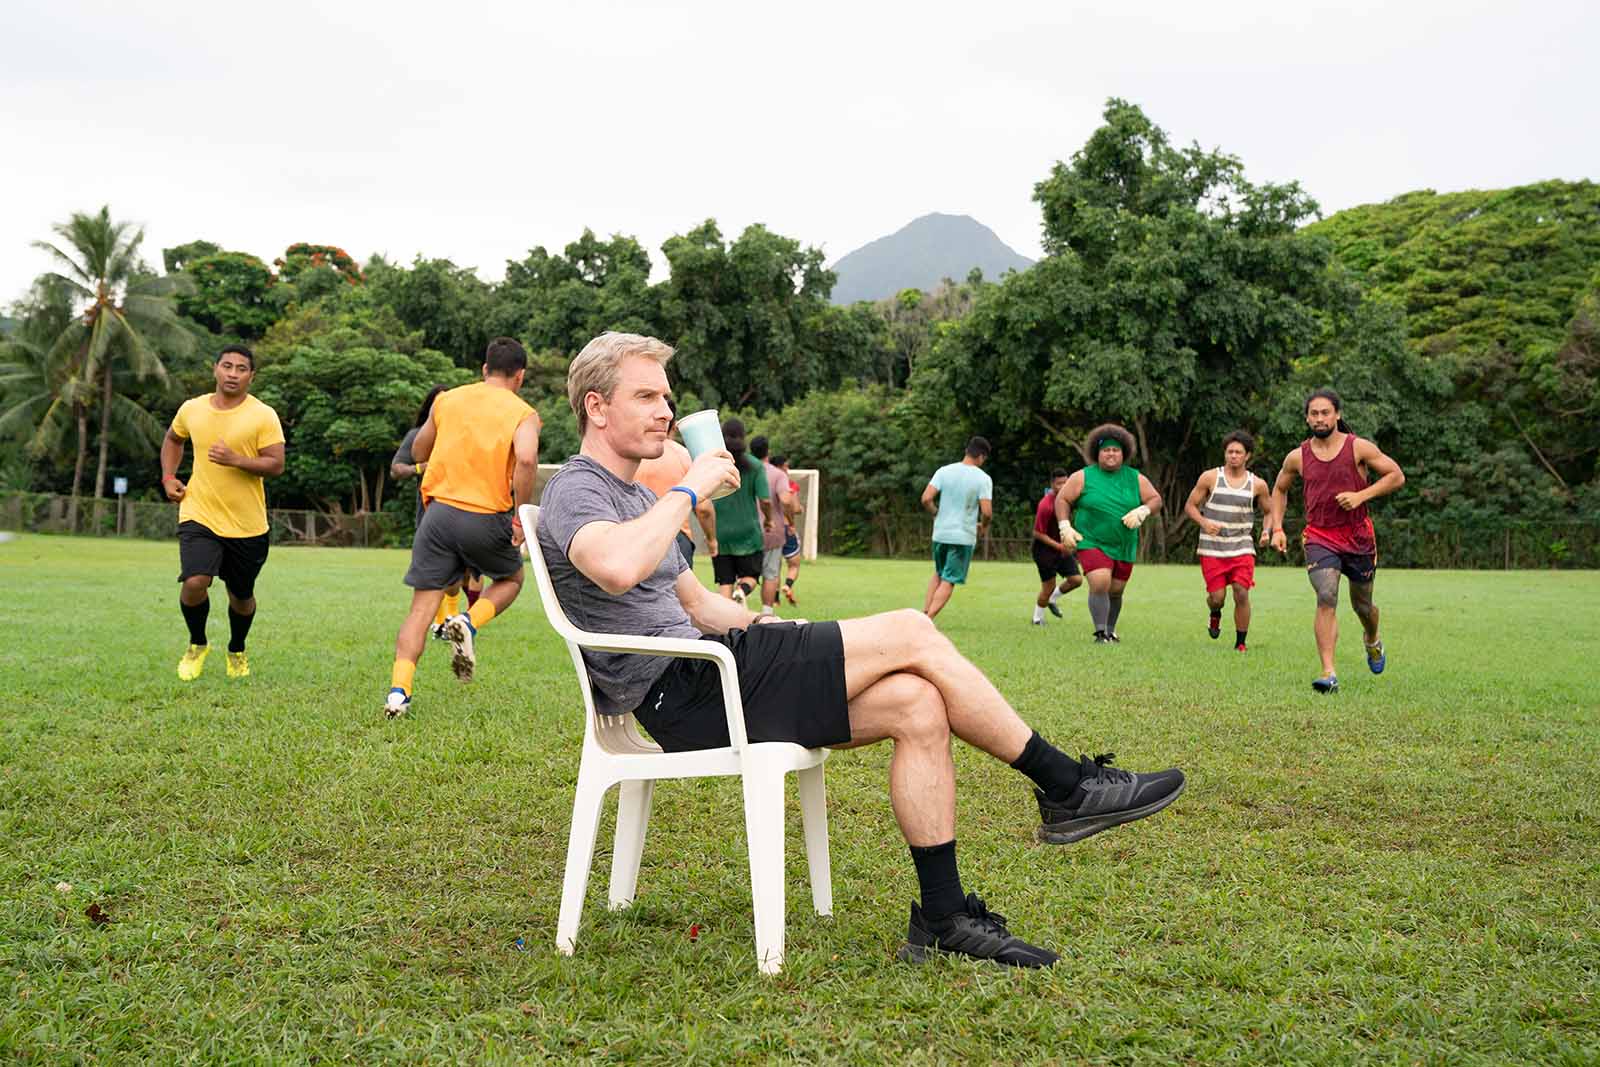 In Next Goal Wins, Thomas Rongen (Michael Fassbender) is a down-on-his-luck coach tasked with coaching the American Samoa soccer team. Image © Searchlight Pictures